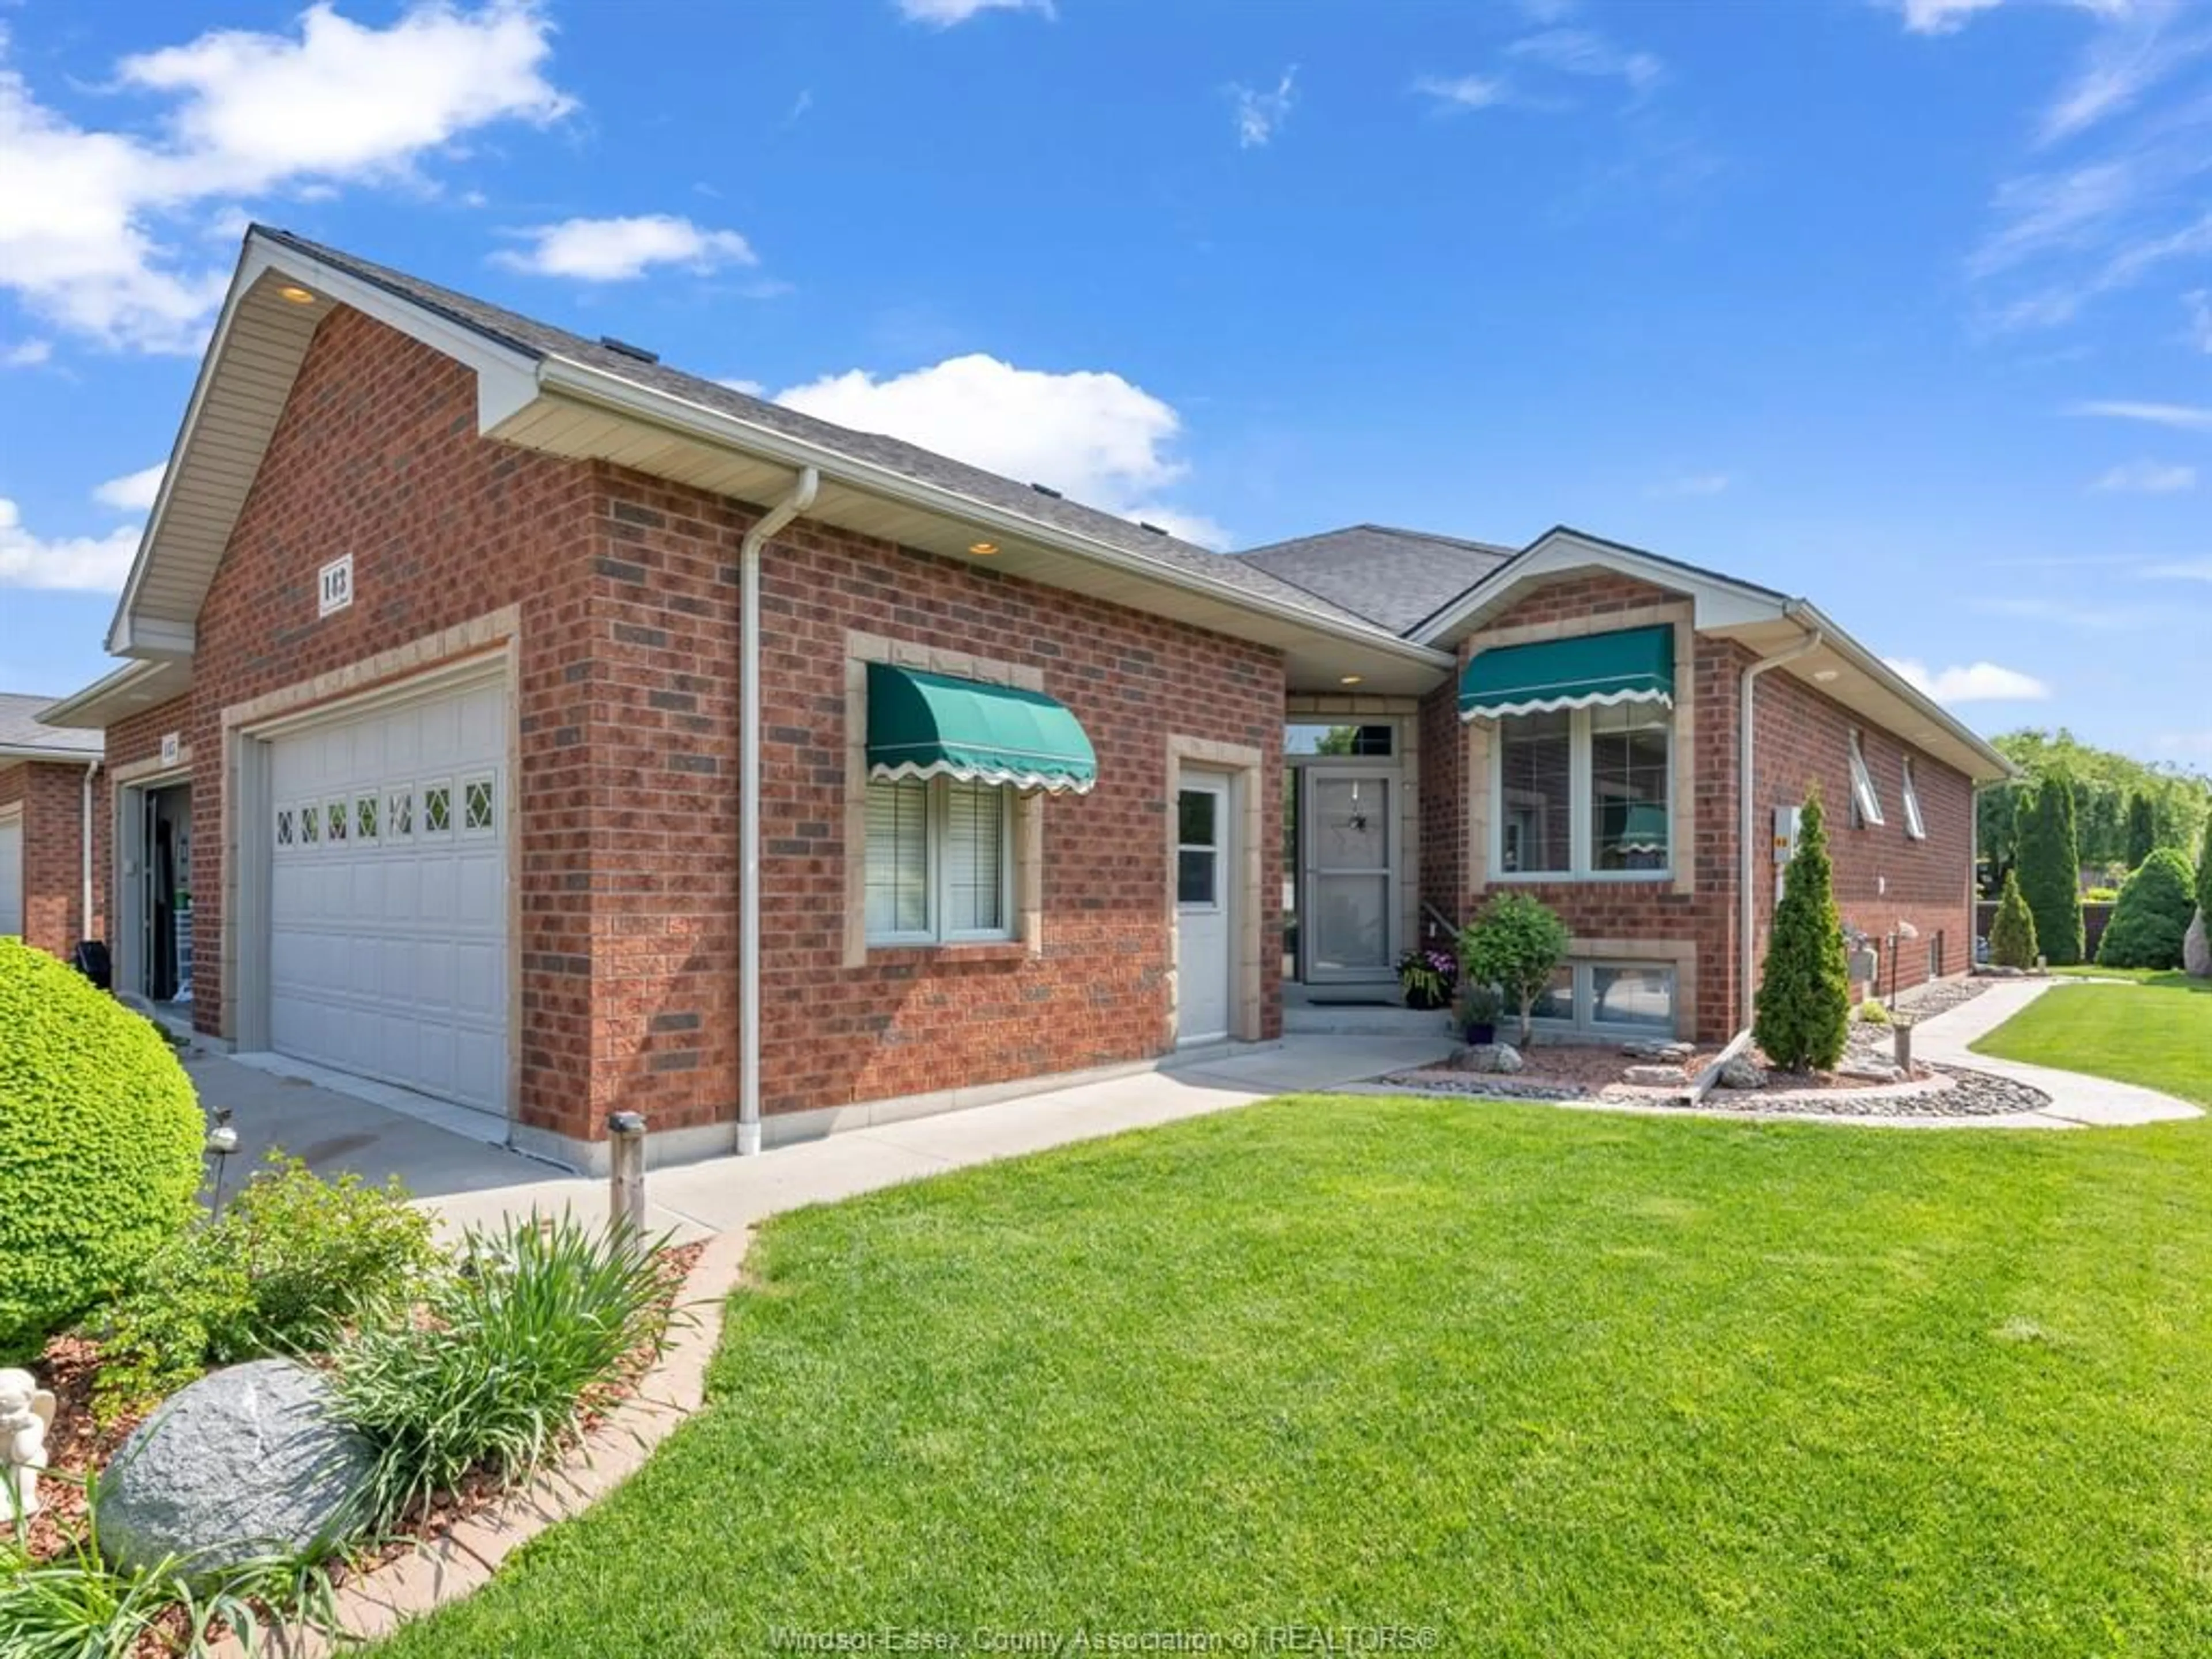 Home with brick exterior material for 143 WOODYCREST Ave, Kingsville Ontario N9Y 4G3